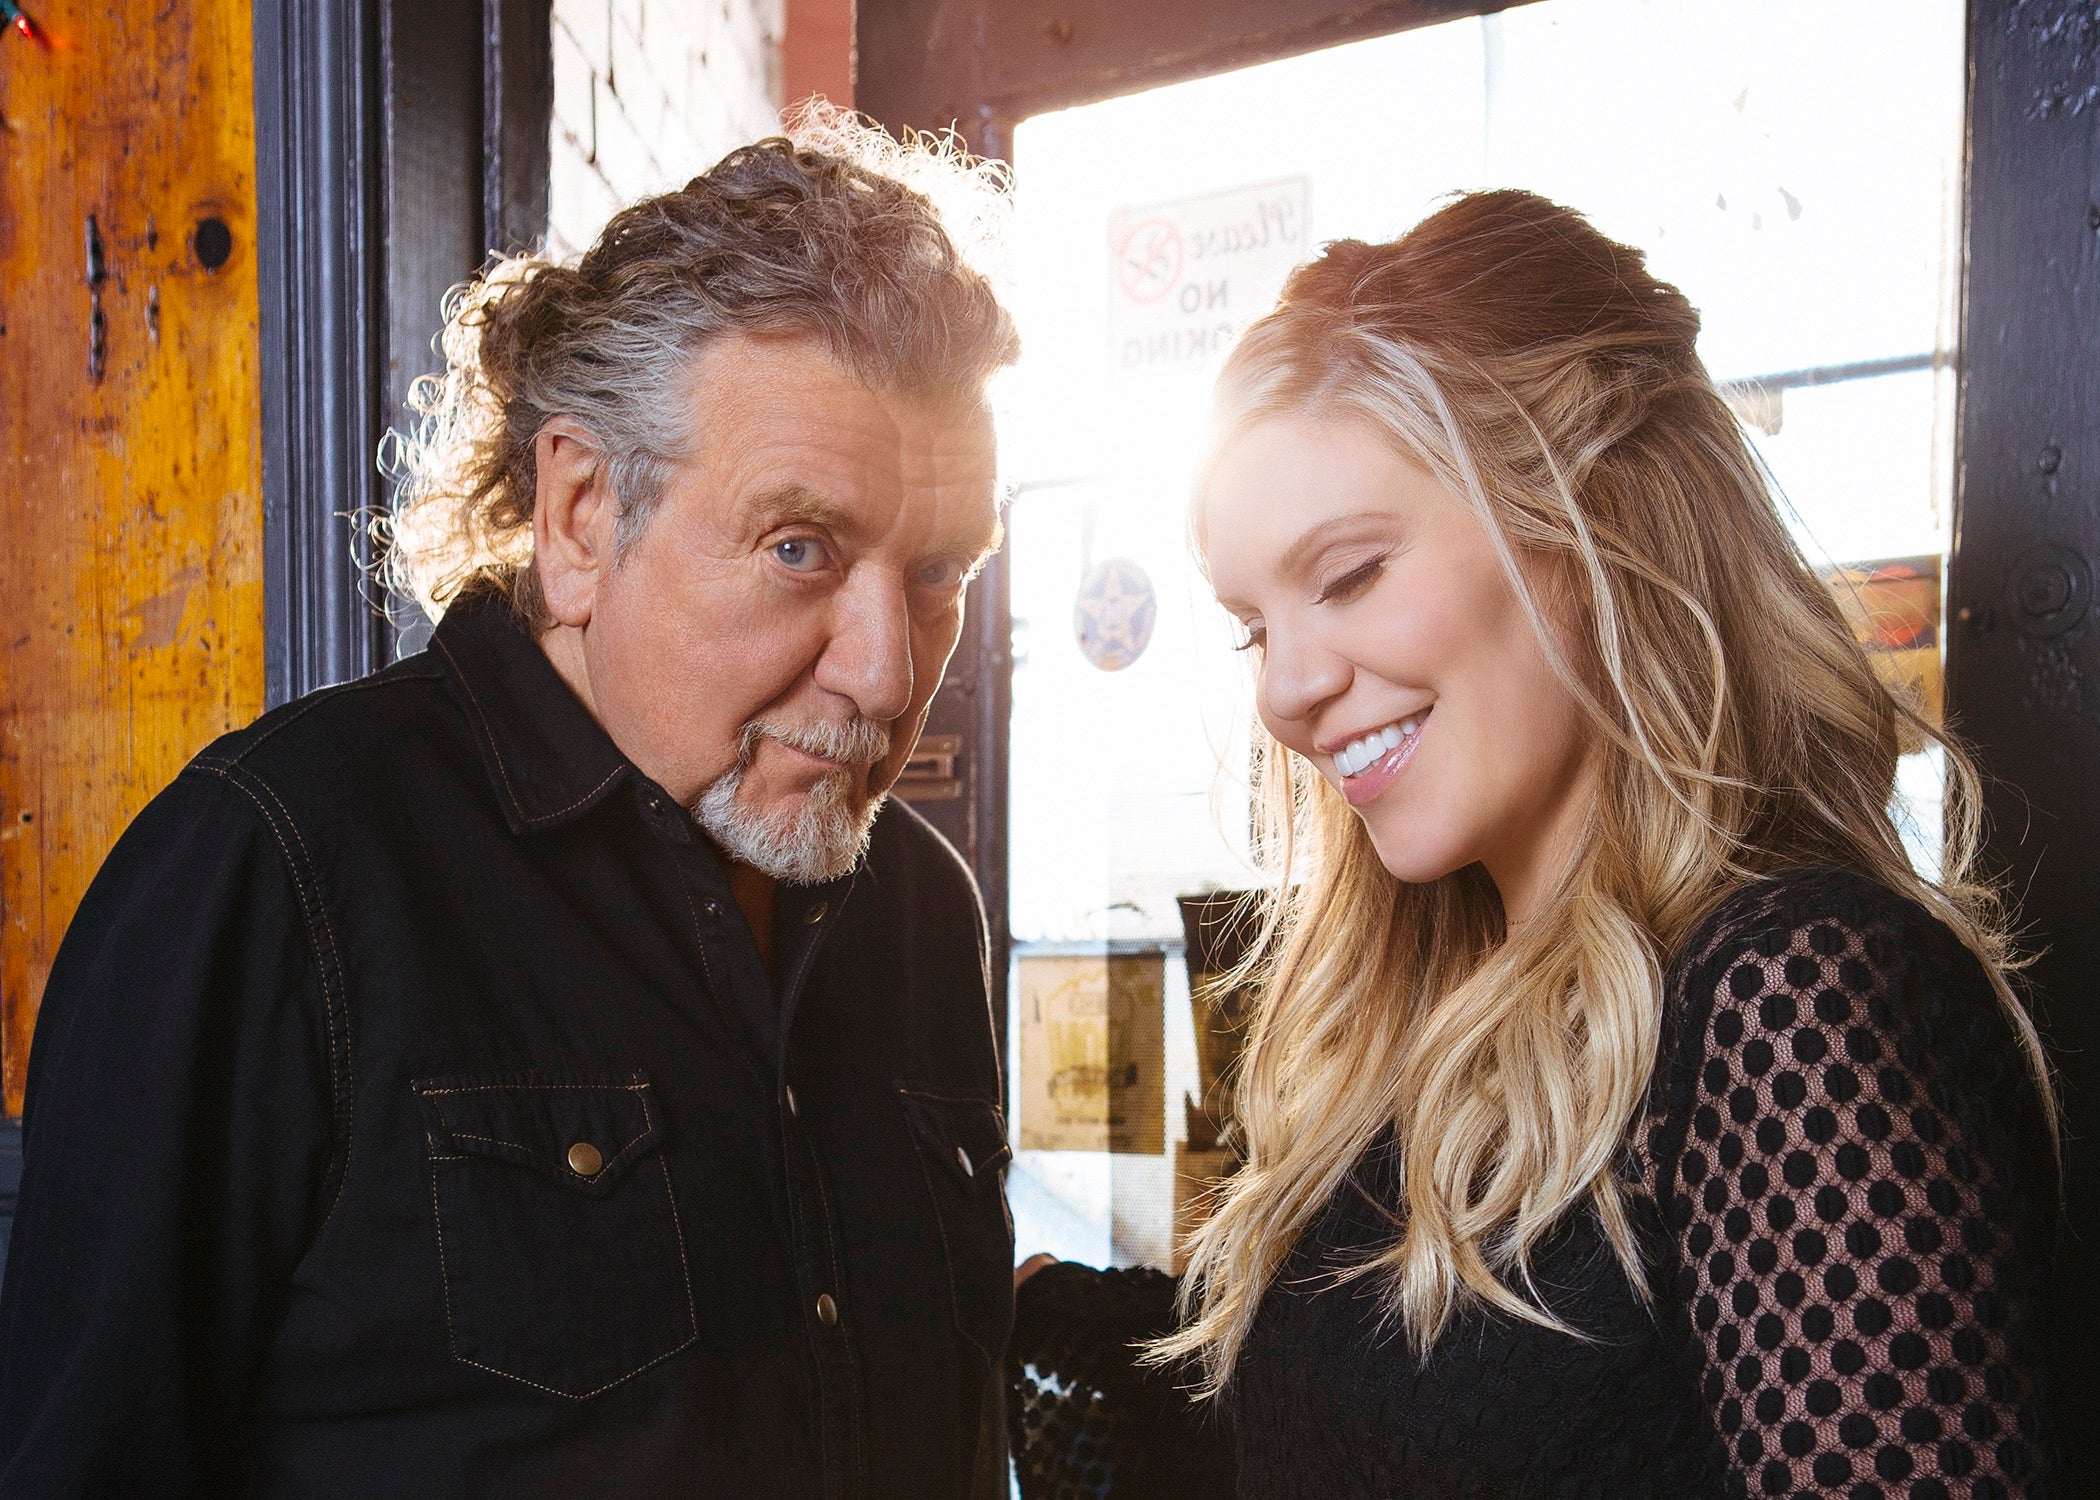 Robert Plant: ‘With Alison and I, we’re leagues apart in so many elements'